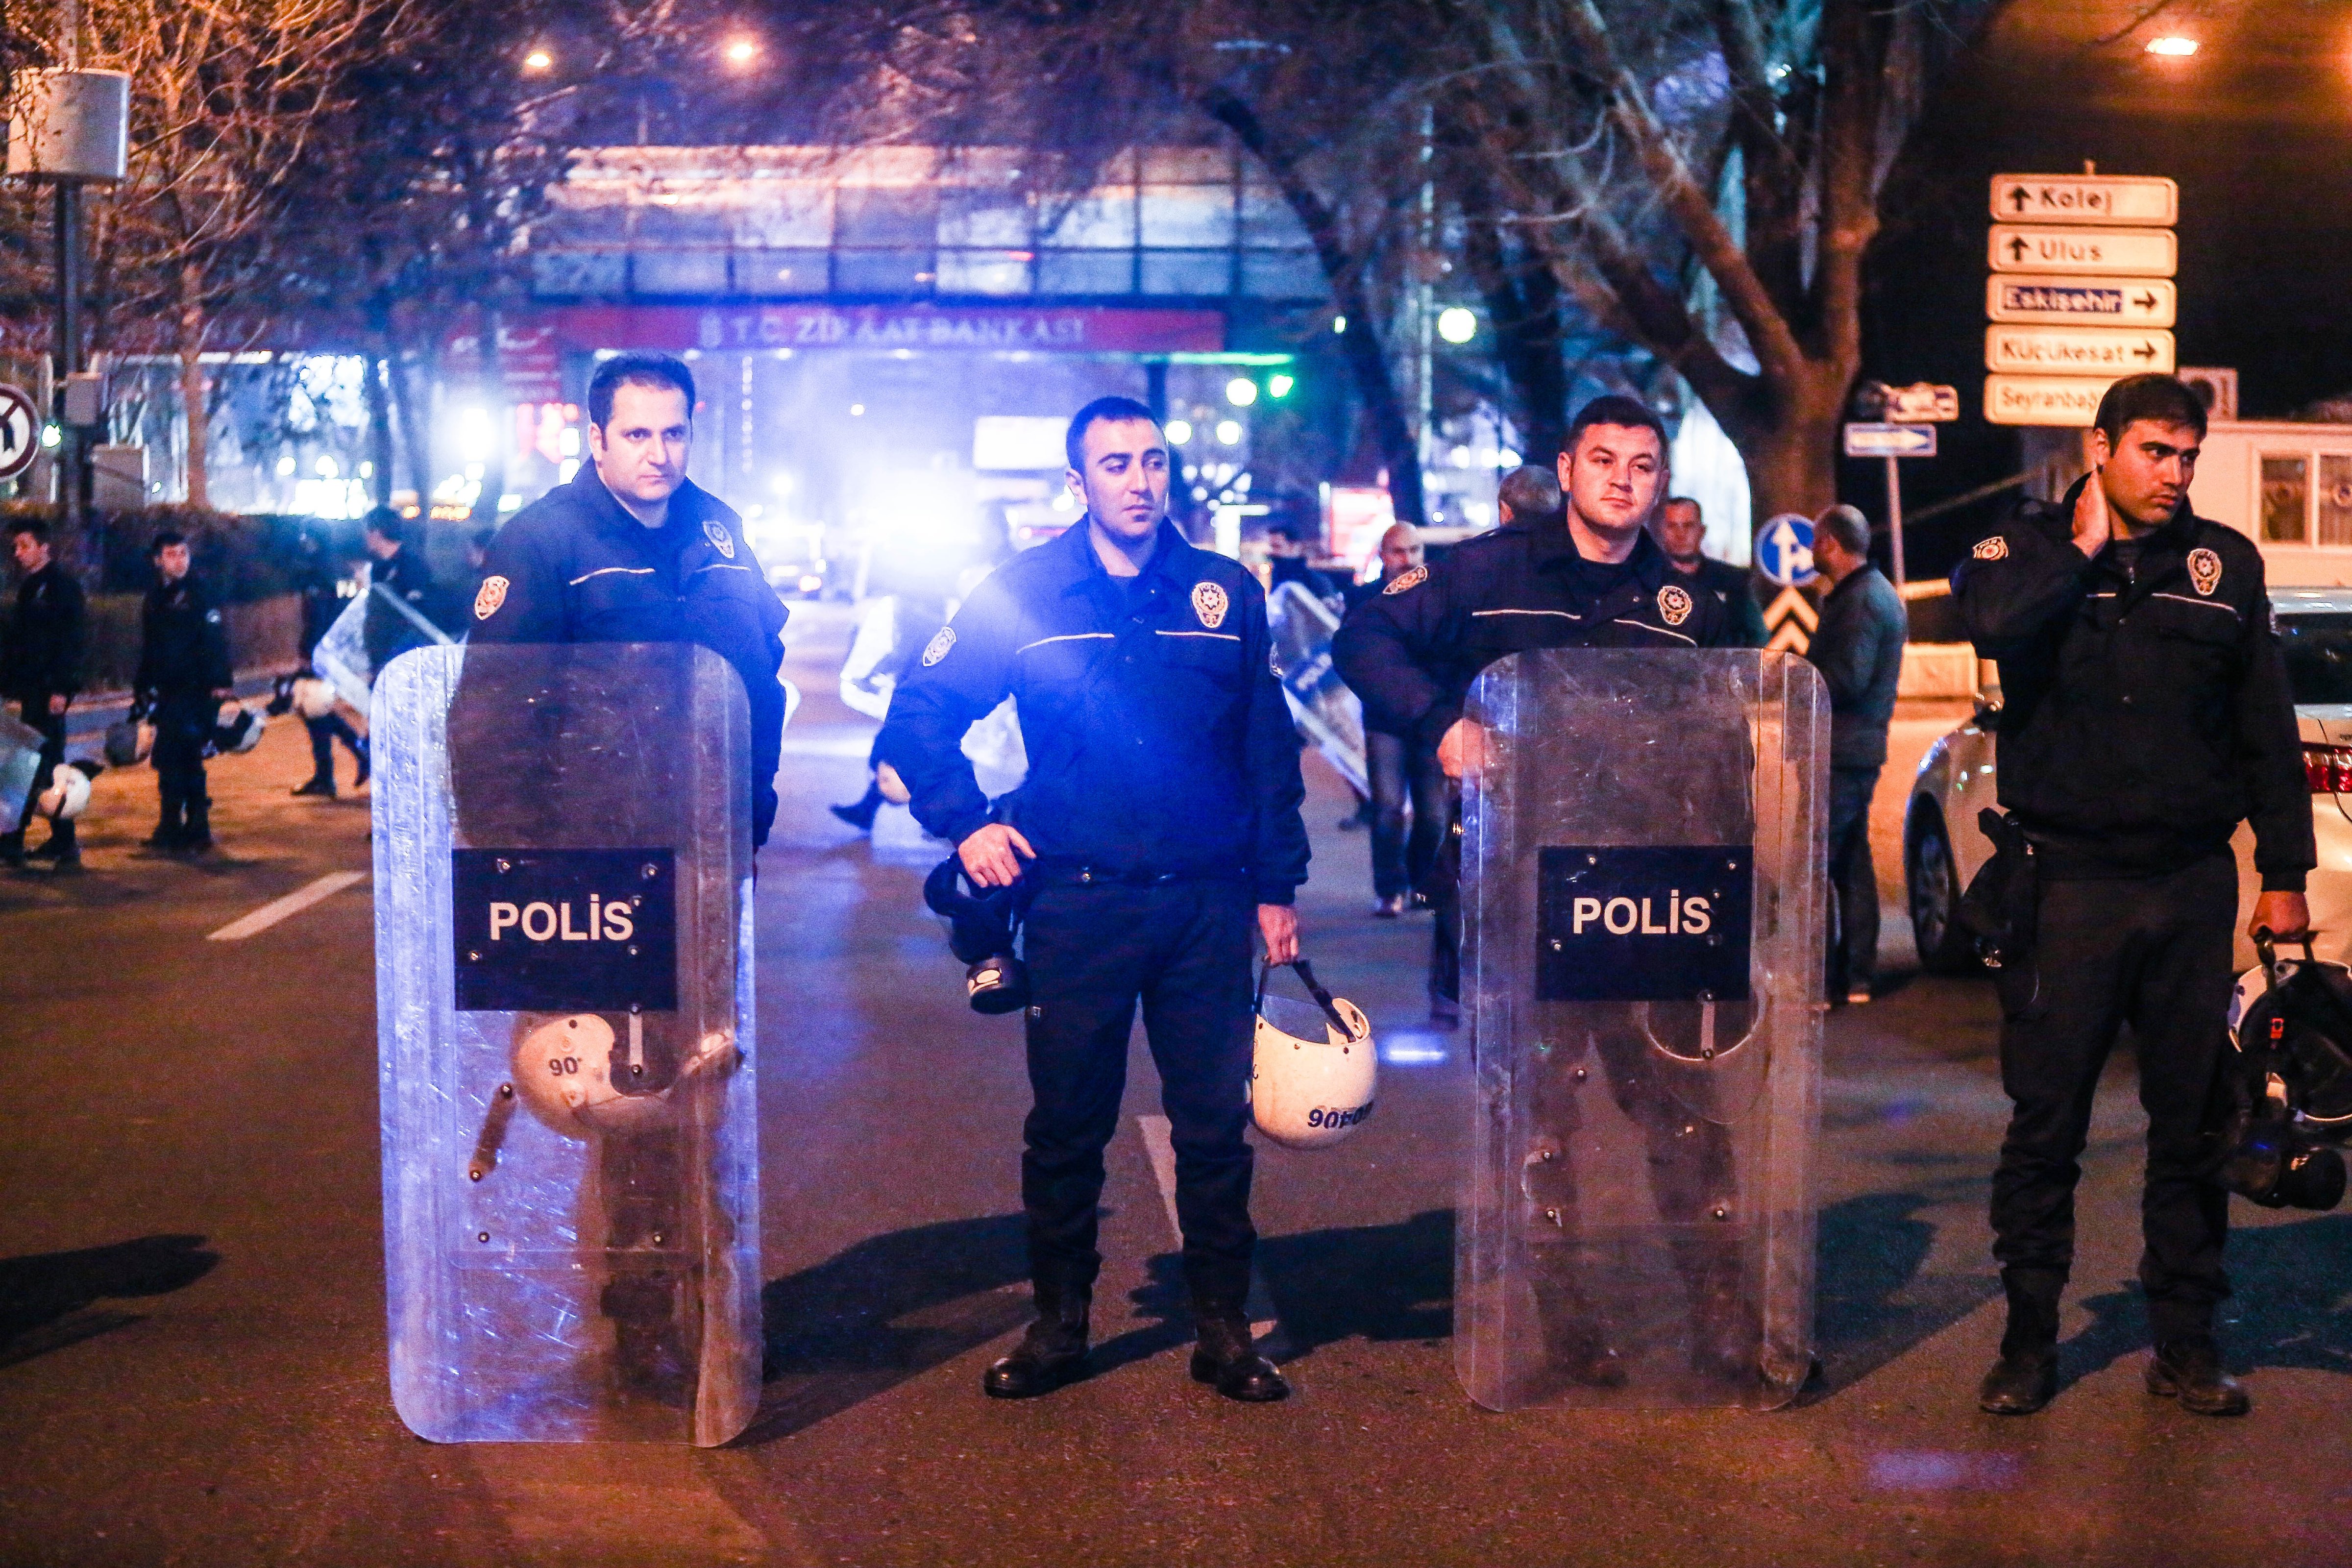 Turkish riot police secure the scene after an explosion in Ankara's central Kizilay district on March 13, 2016. (Defne Karadeniz—Getty Images)